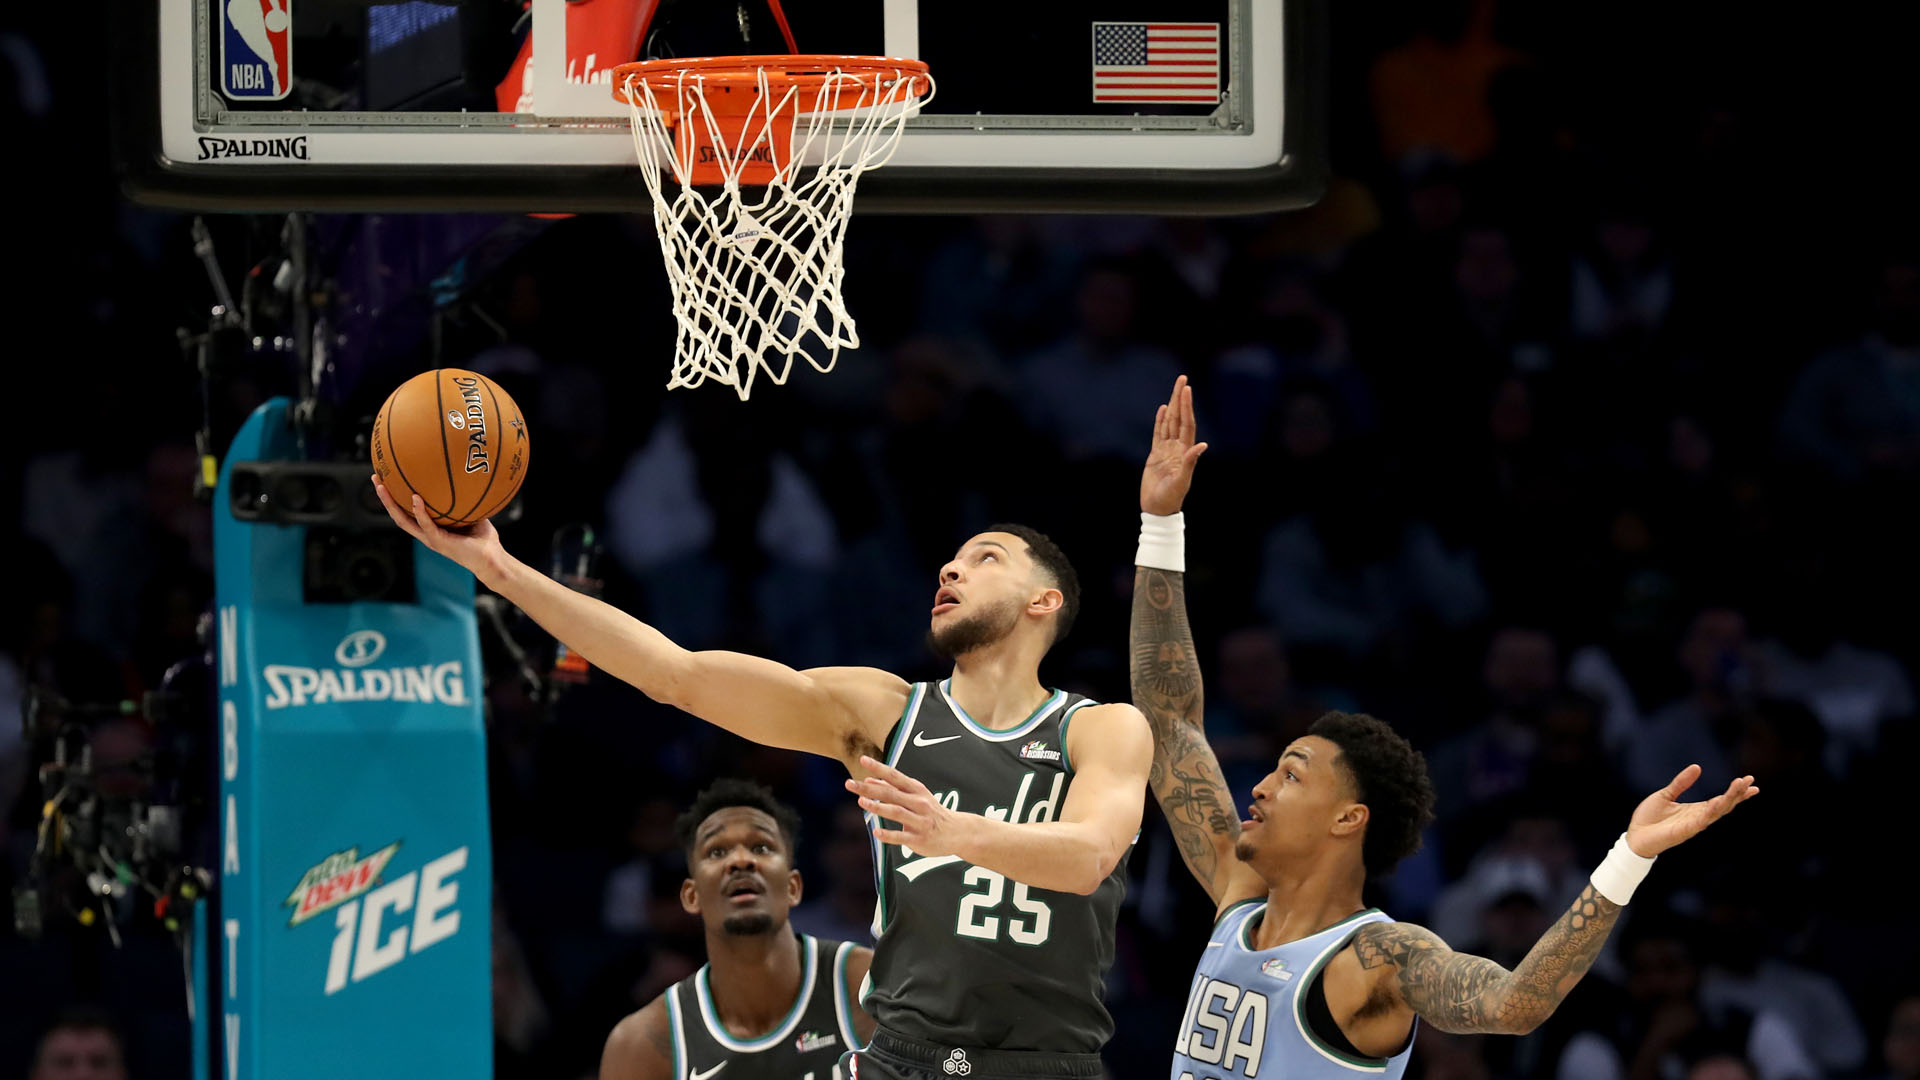 Kyle Kuzma was named the MVP as Team USA beat Team World in the Rising Stars Challenge.